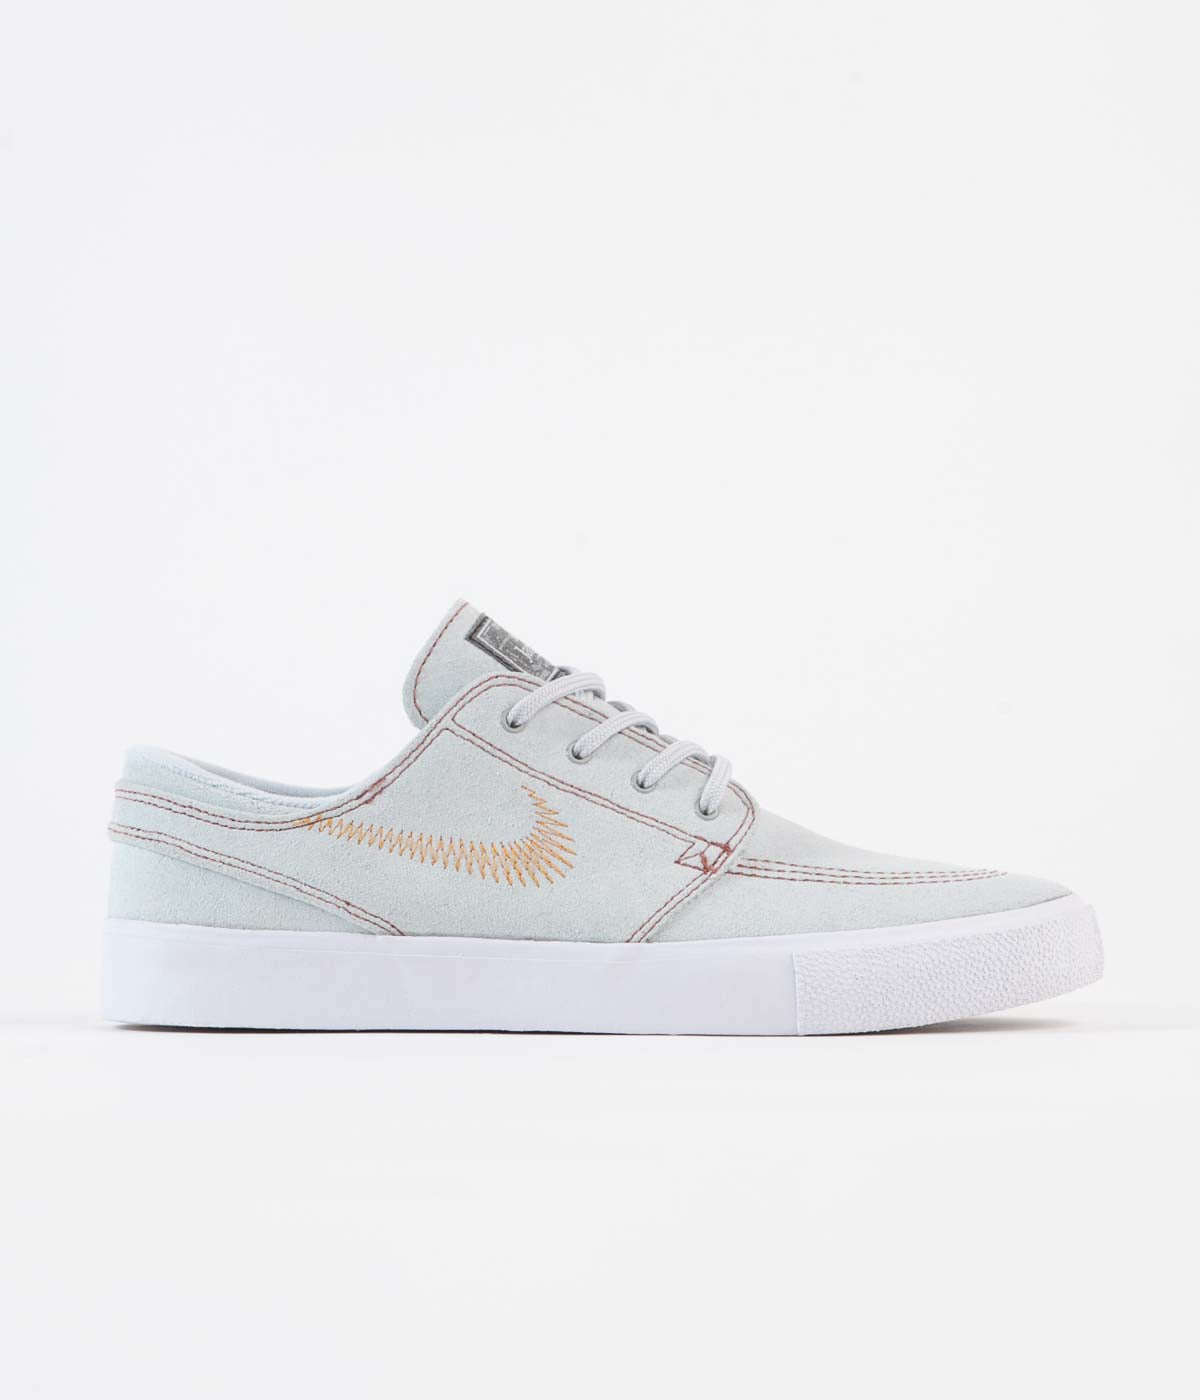 Pure Plat | Nike SB Janoski Flyleather Shoes - leather air max 1 - FitforhealthShops Pure Platinum / Monarch